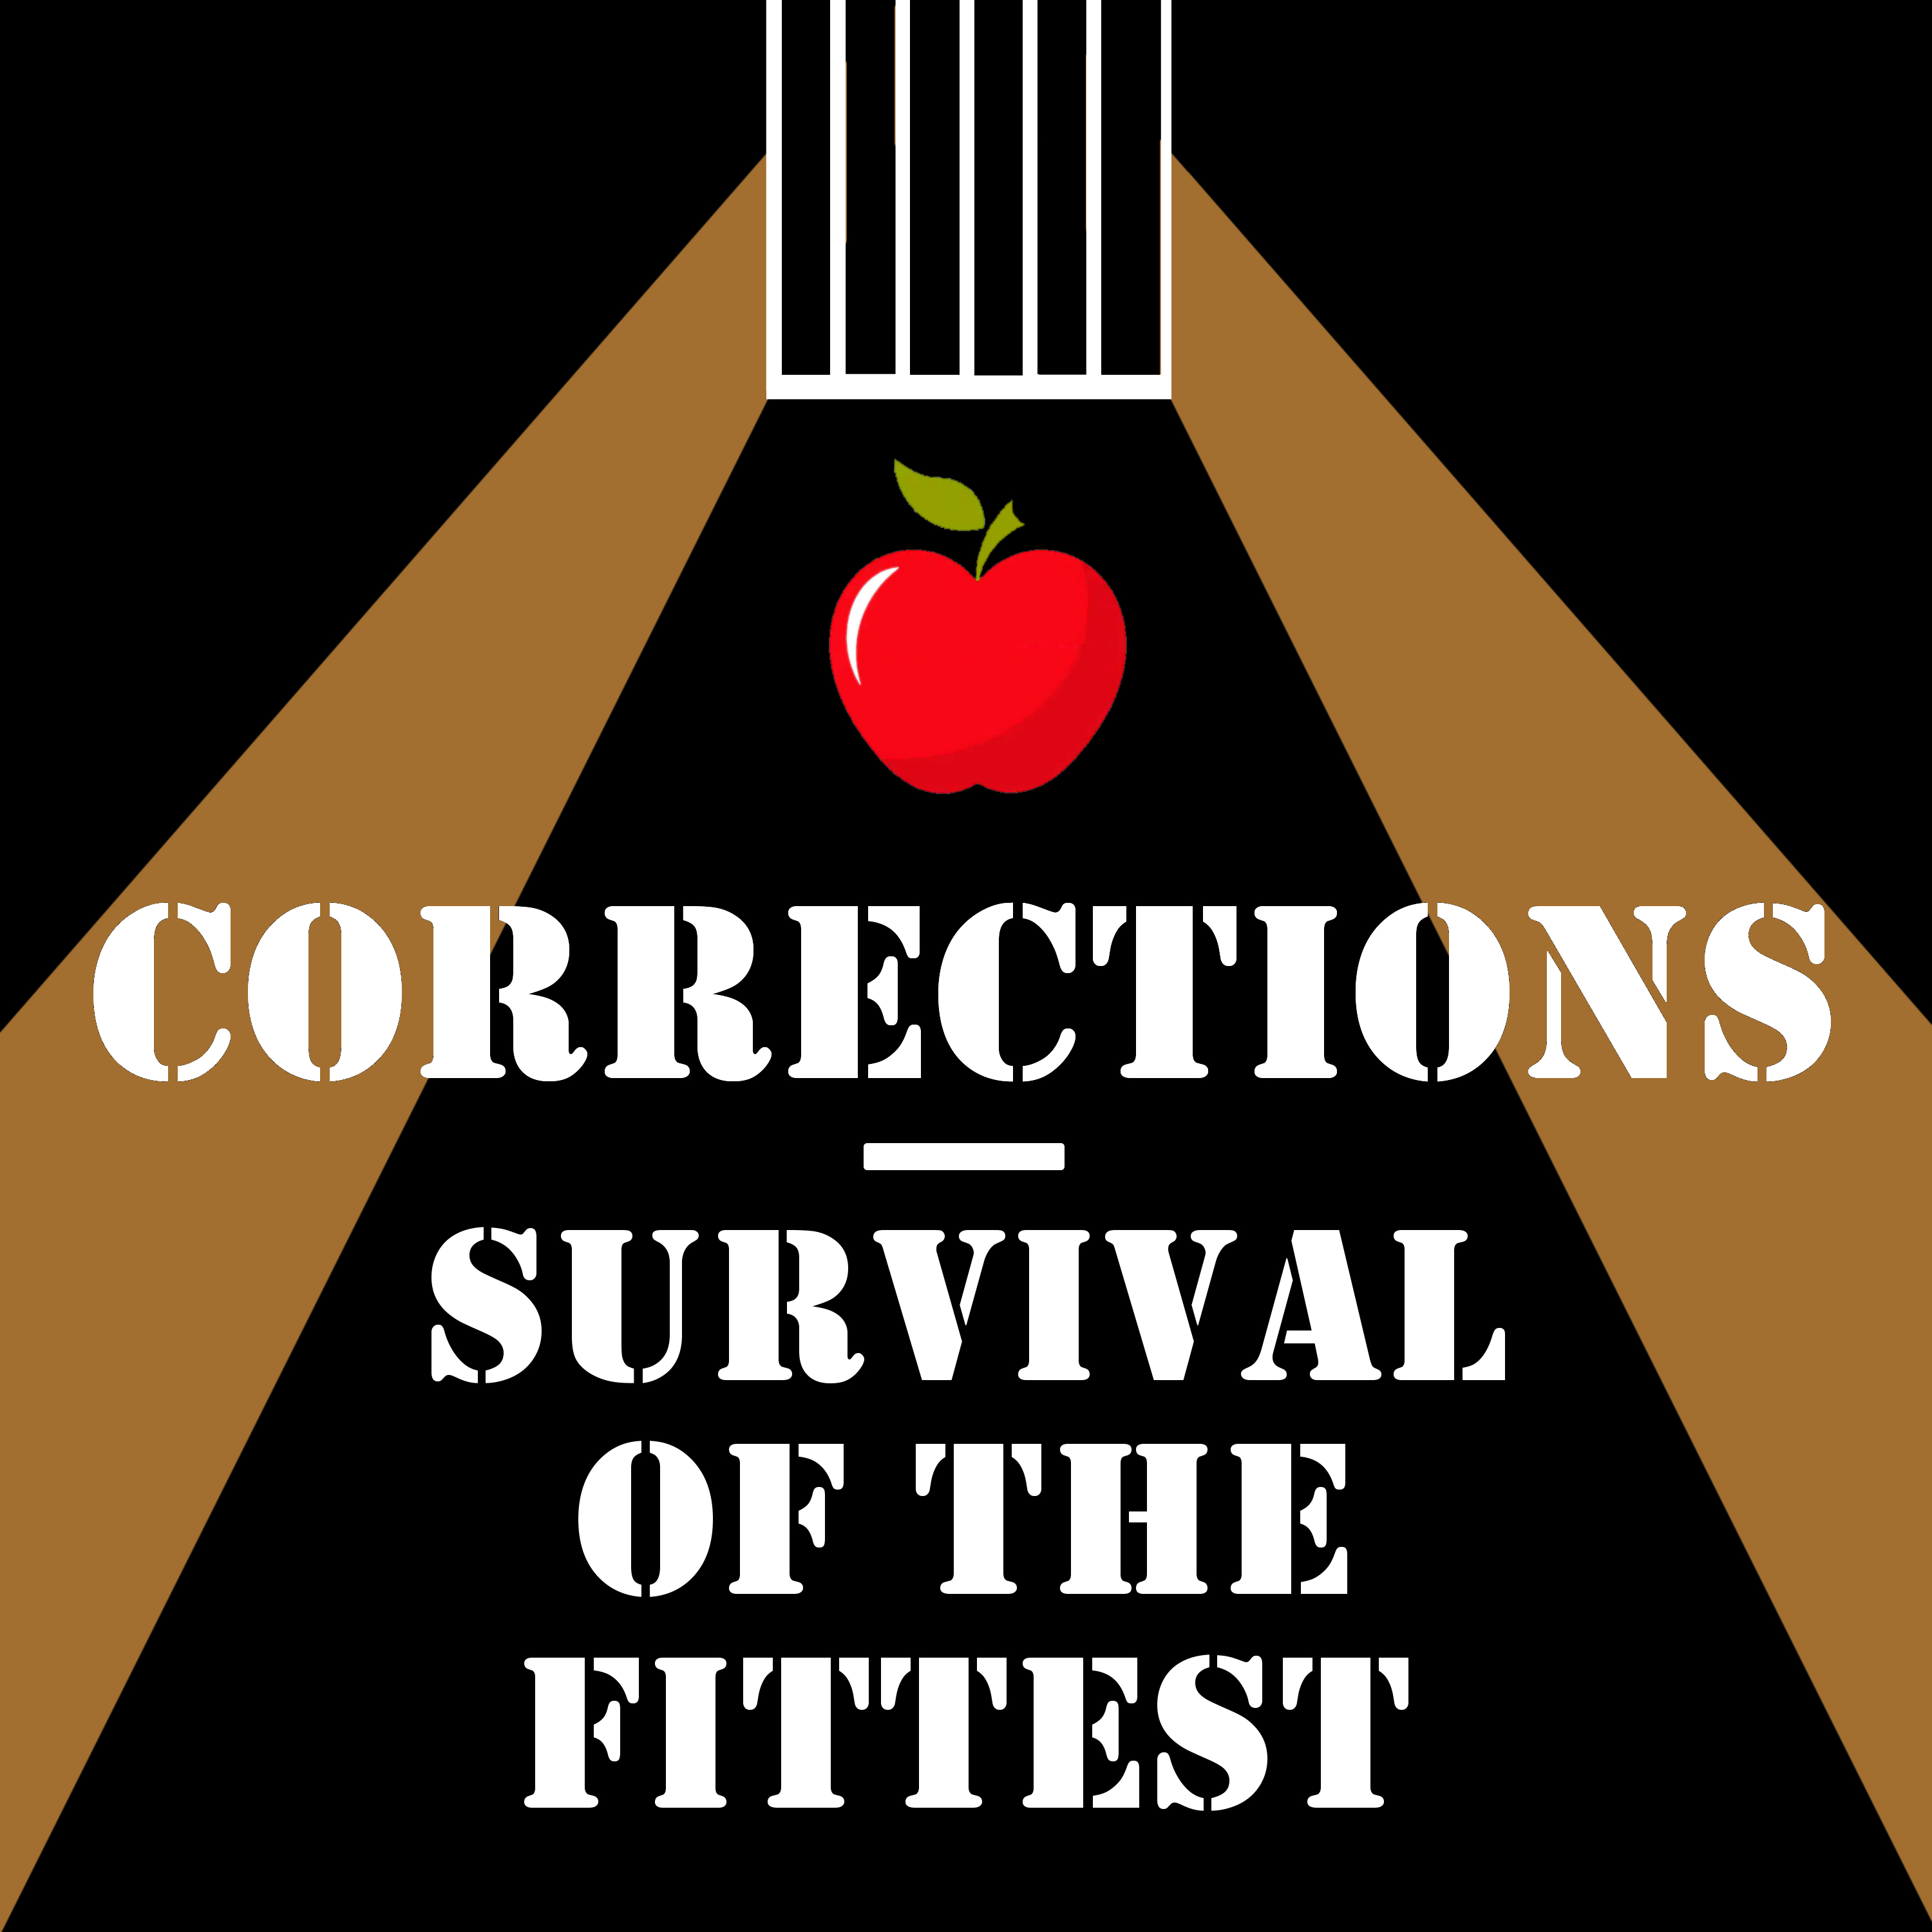 Artwork for Corrections - Survival of the Fittest